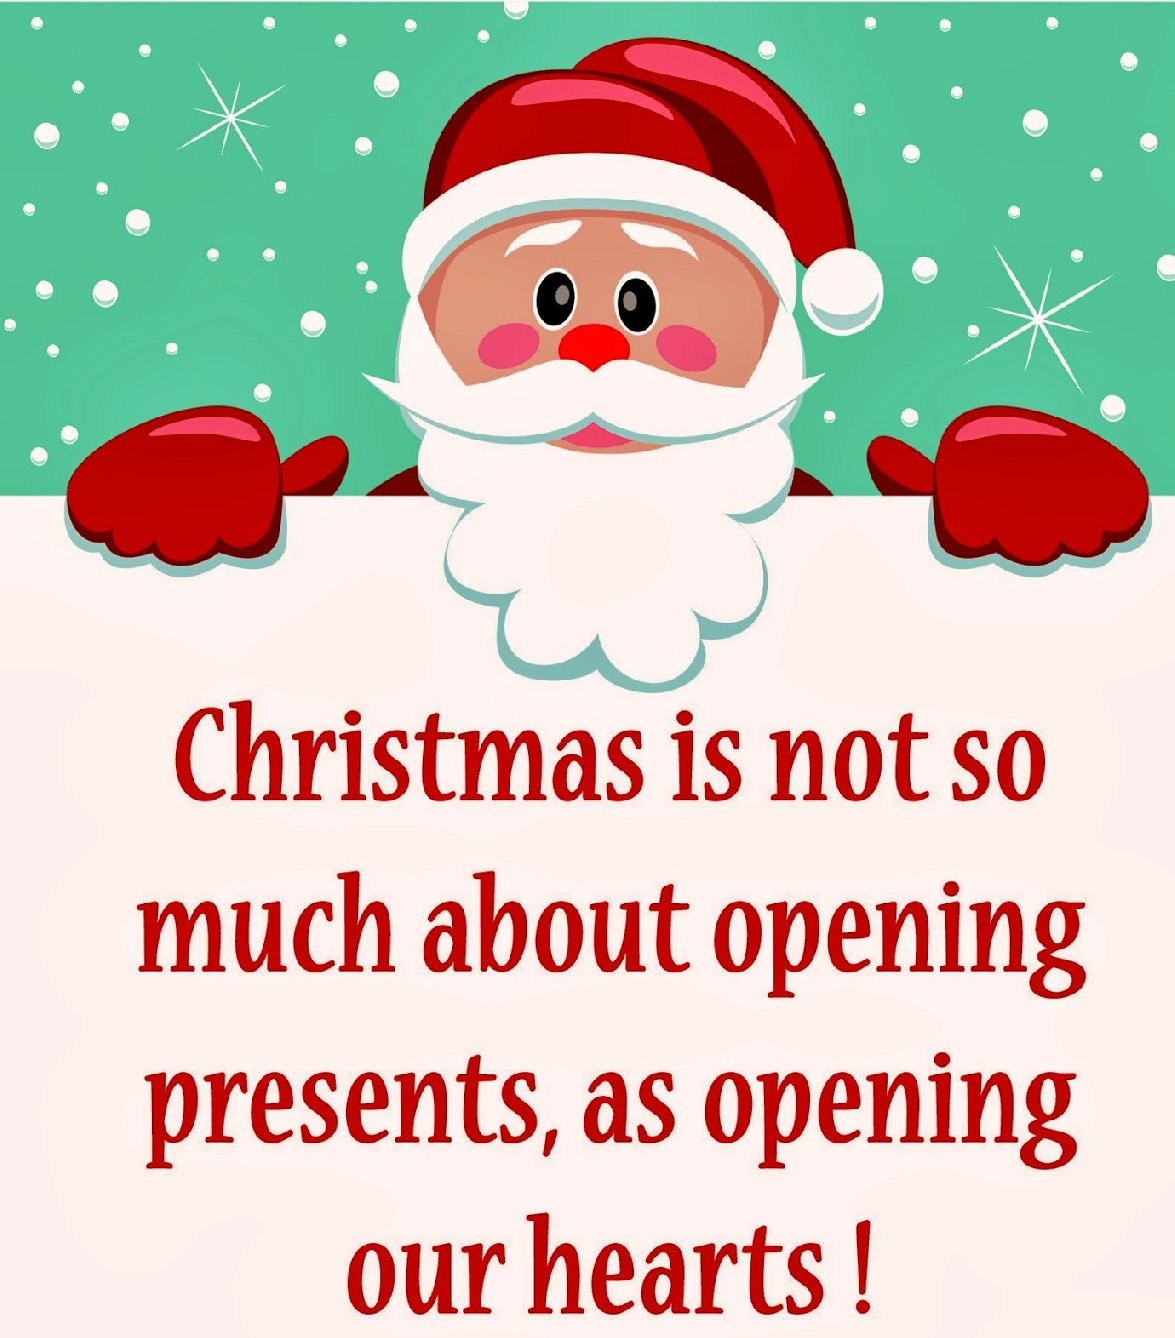 Merry Christmas Sister Quotes
 Merry Christmas Sister Quotes QuotesGram